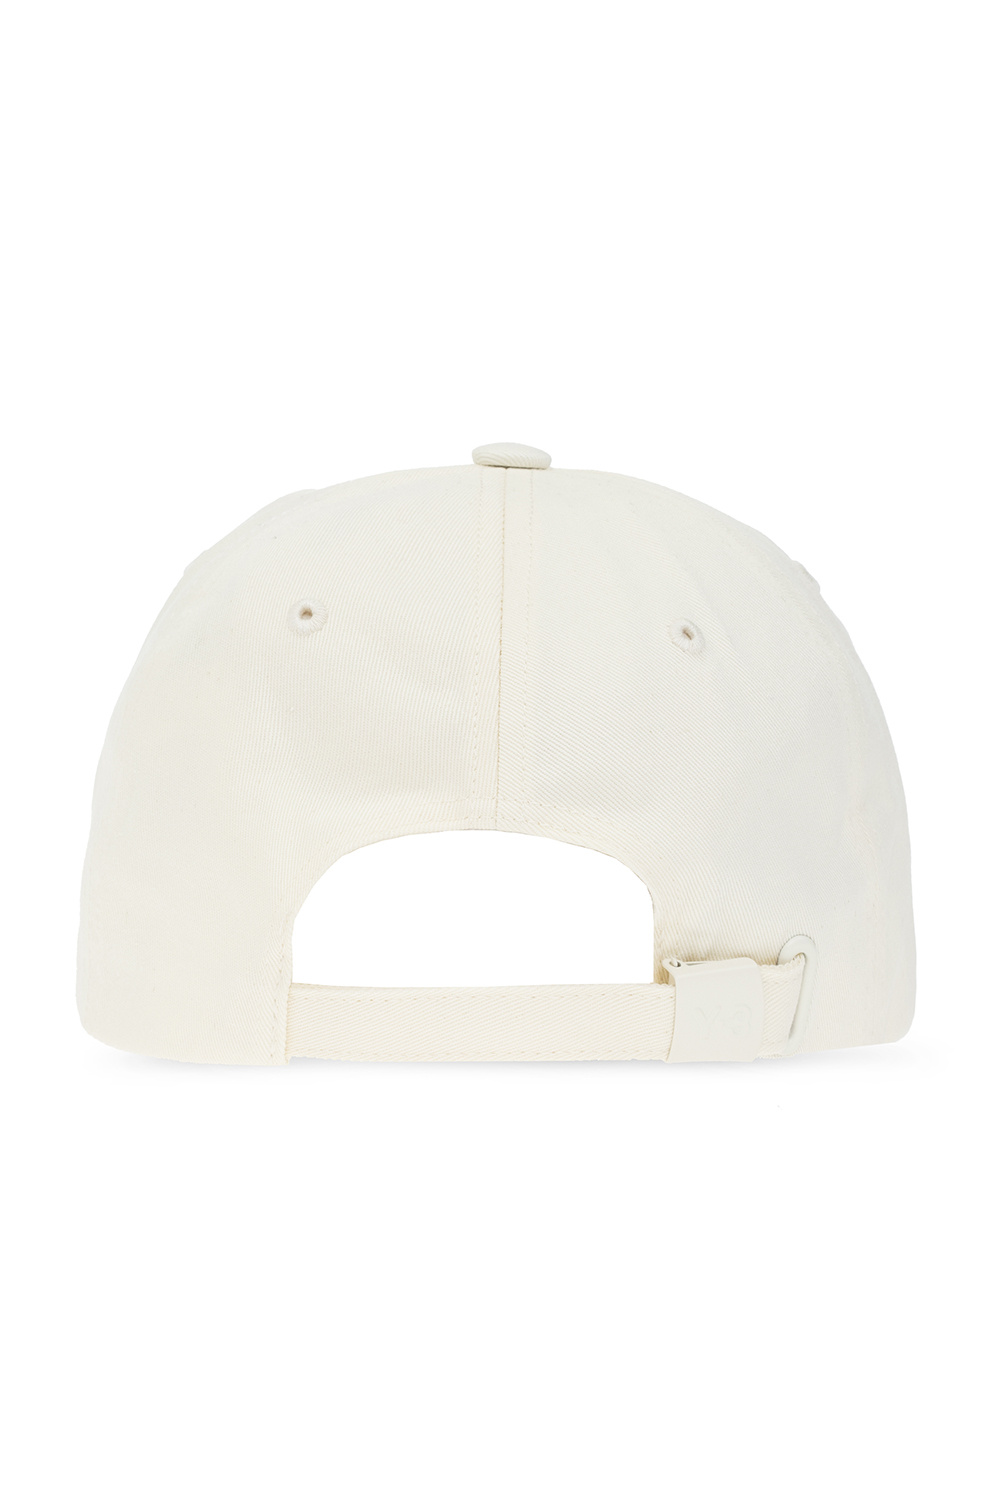 Provided of a special cap that eyewear makes drainage easy Baseball cap